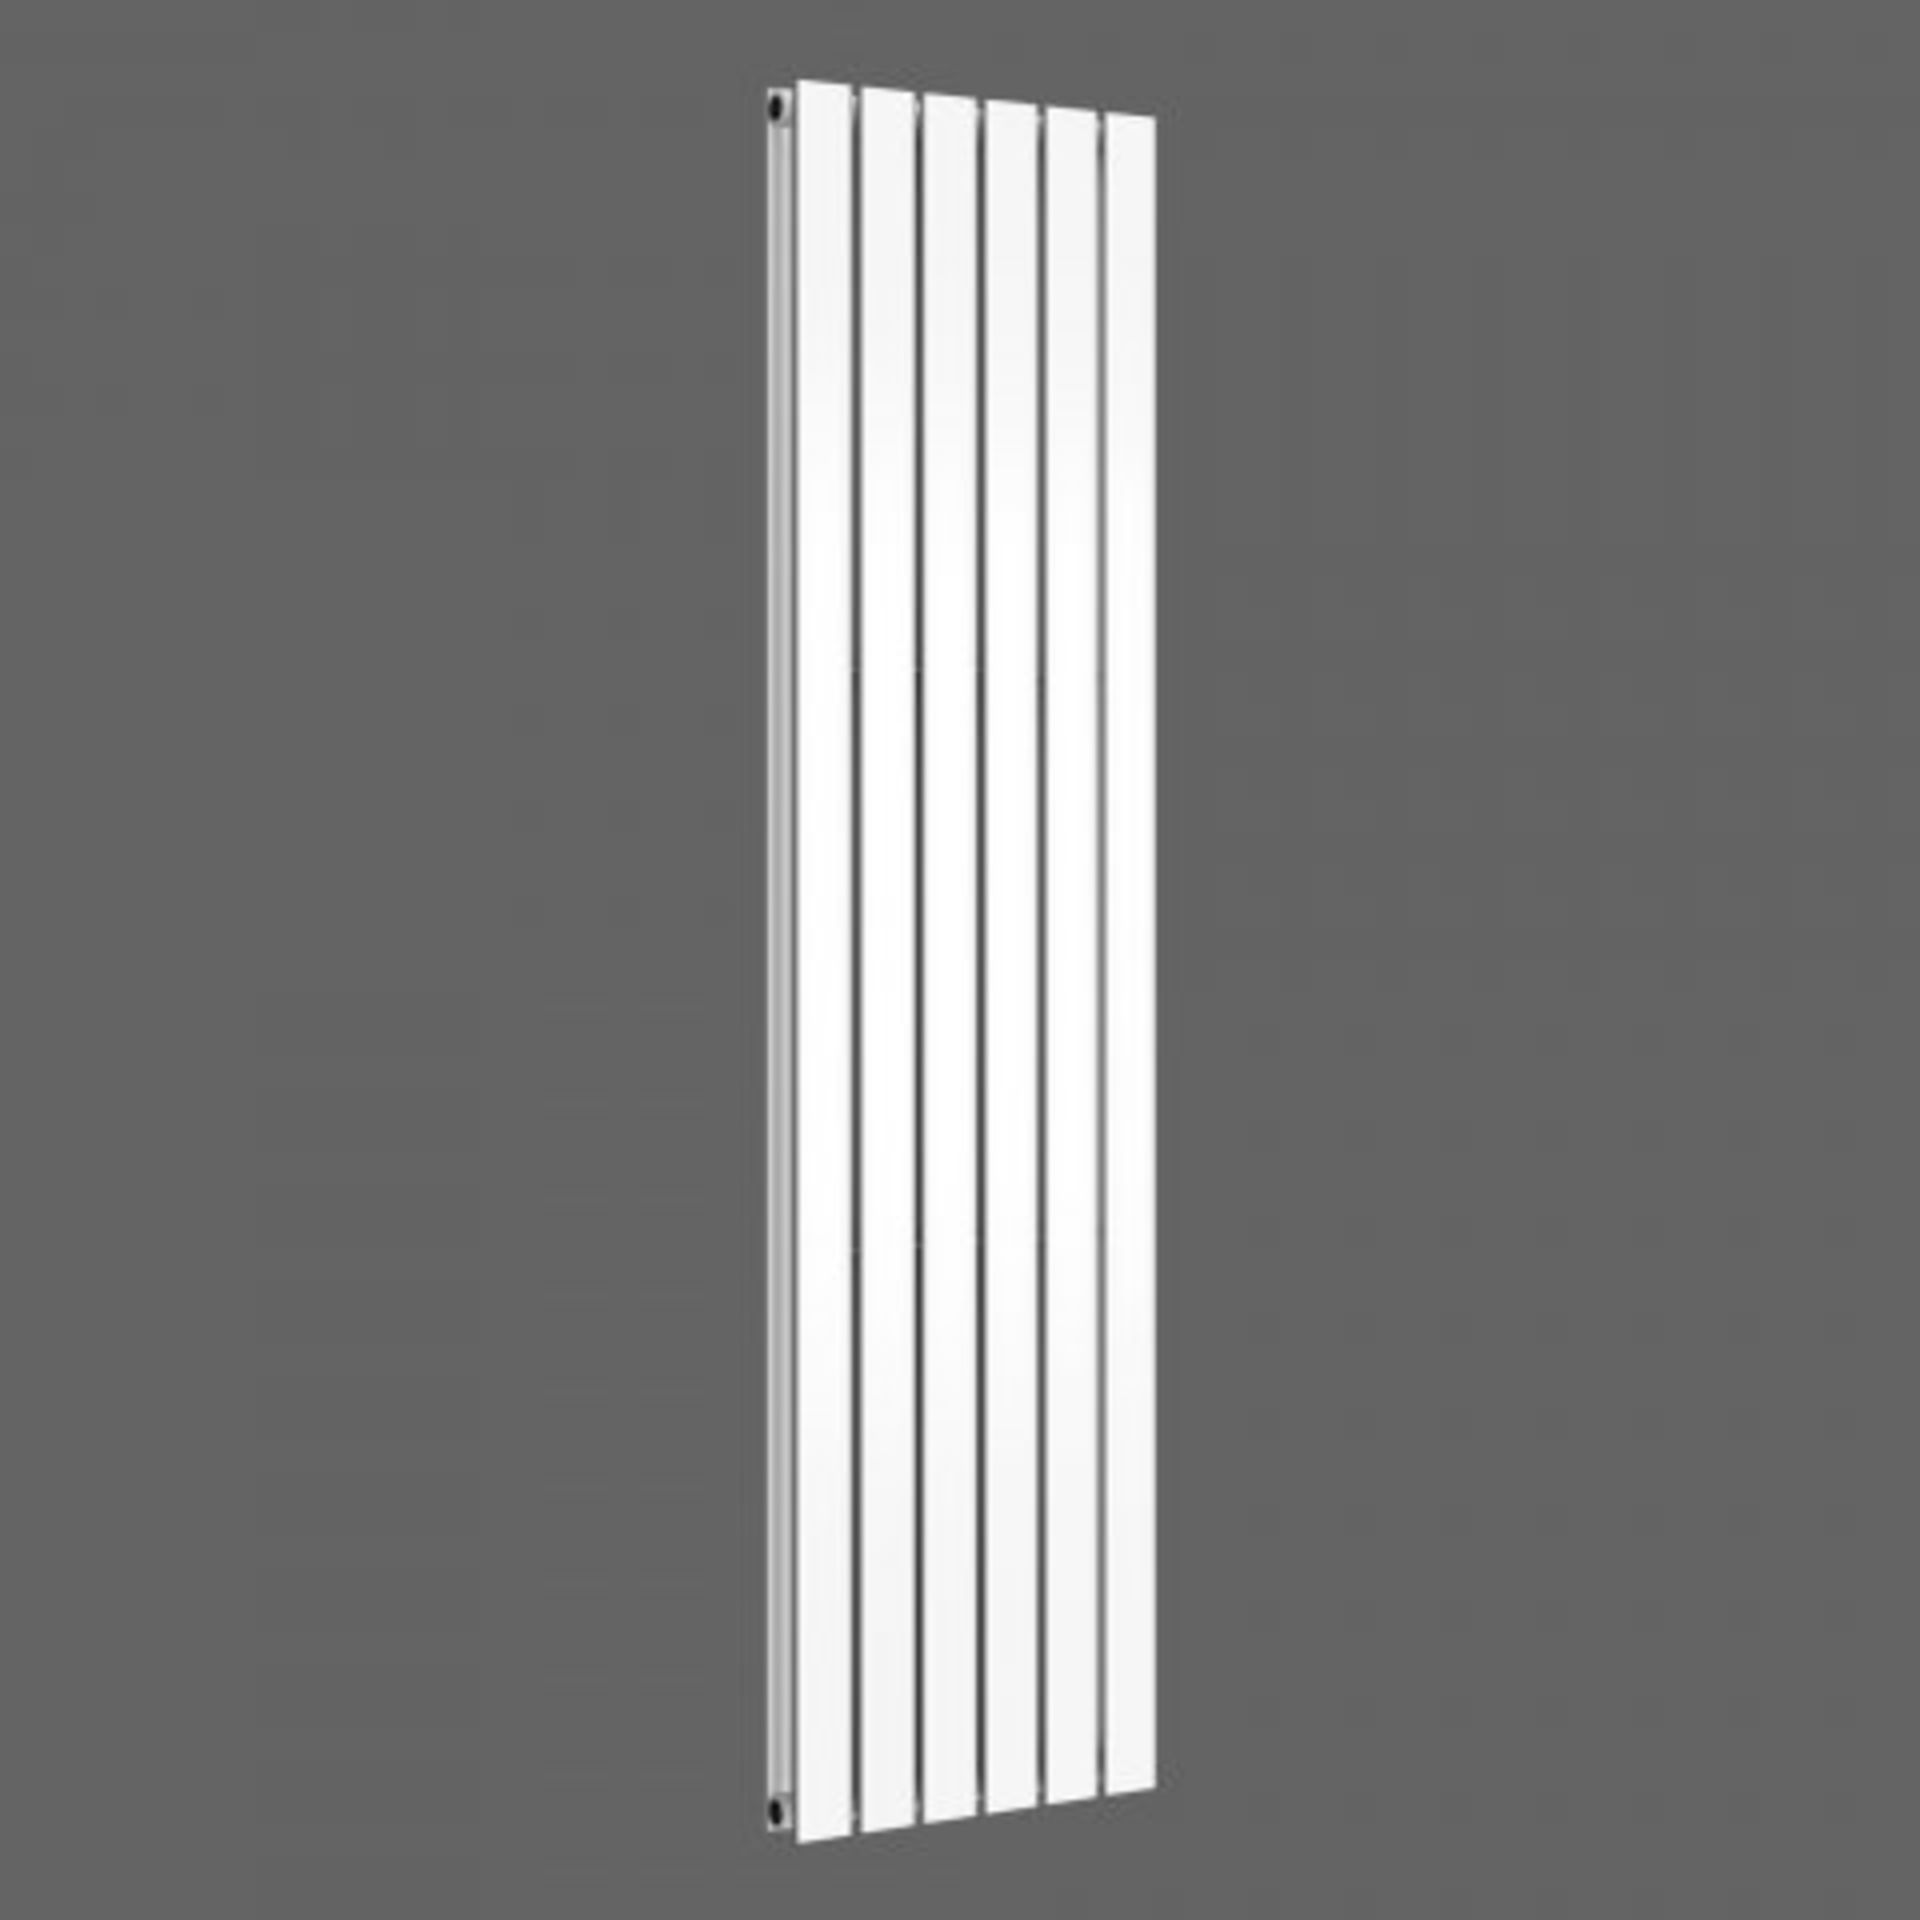 (I46) 1800x452mm Gloss White Double Flat Panel Vertical Radiator RRP £599.99 Attention to detail